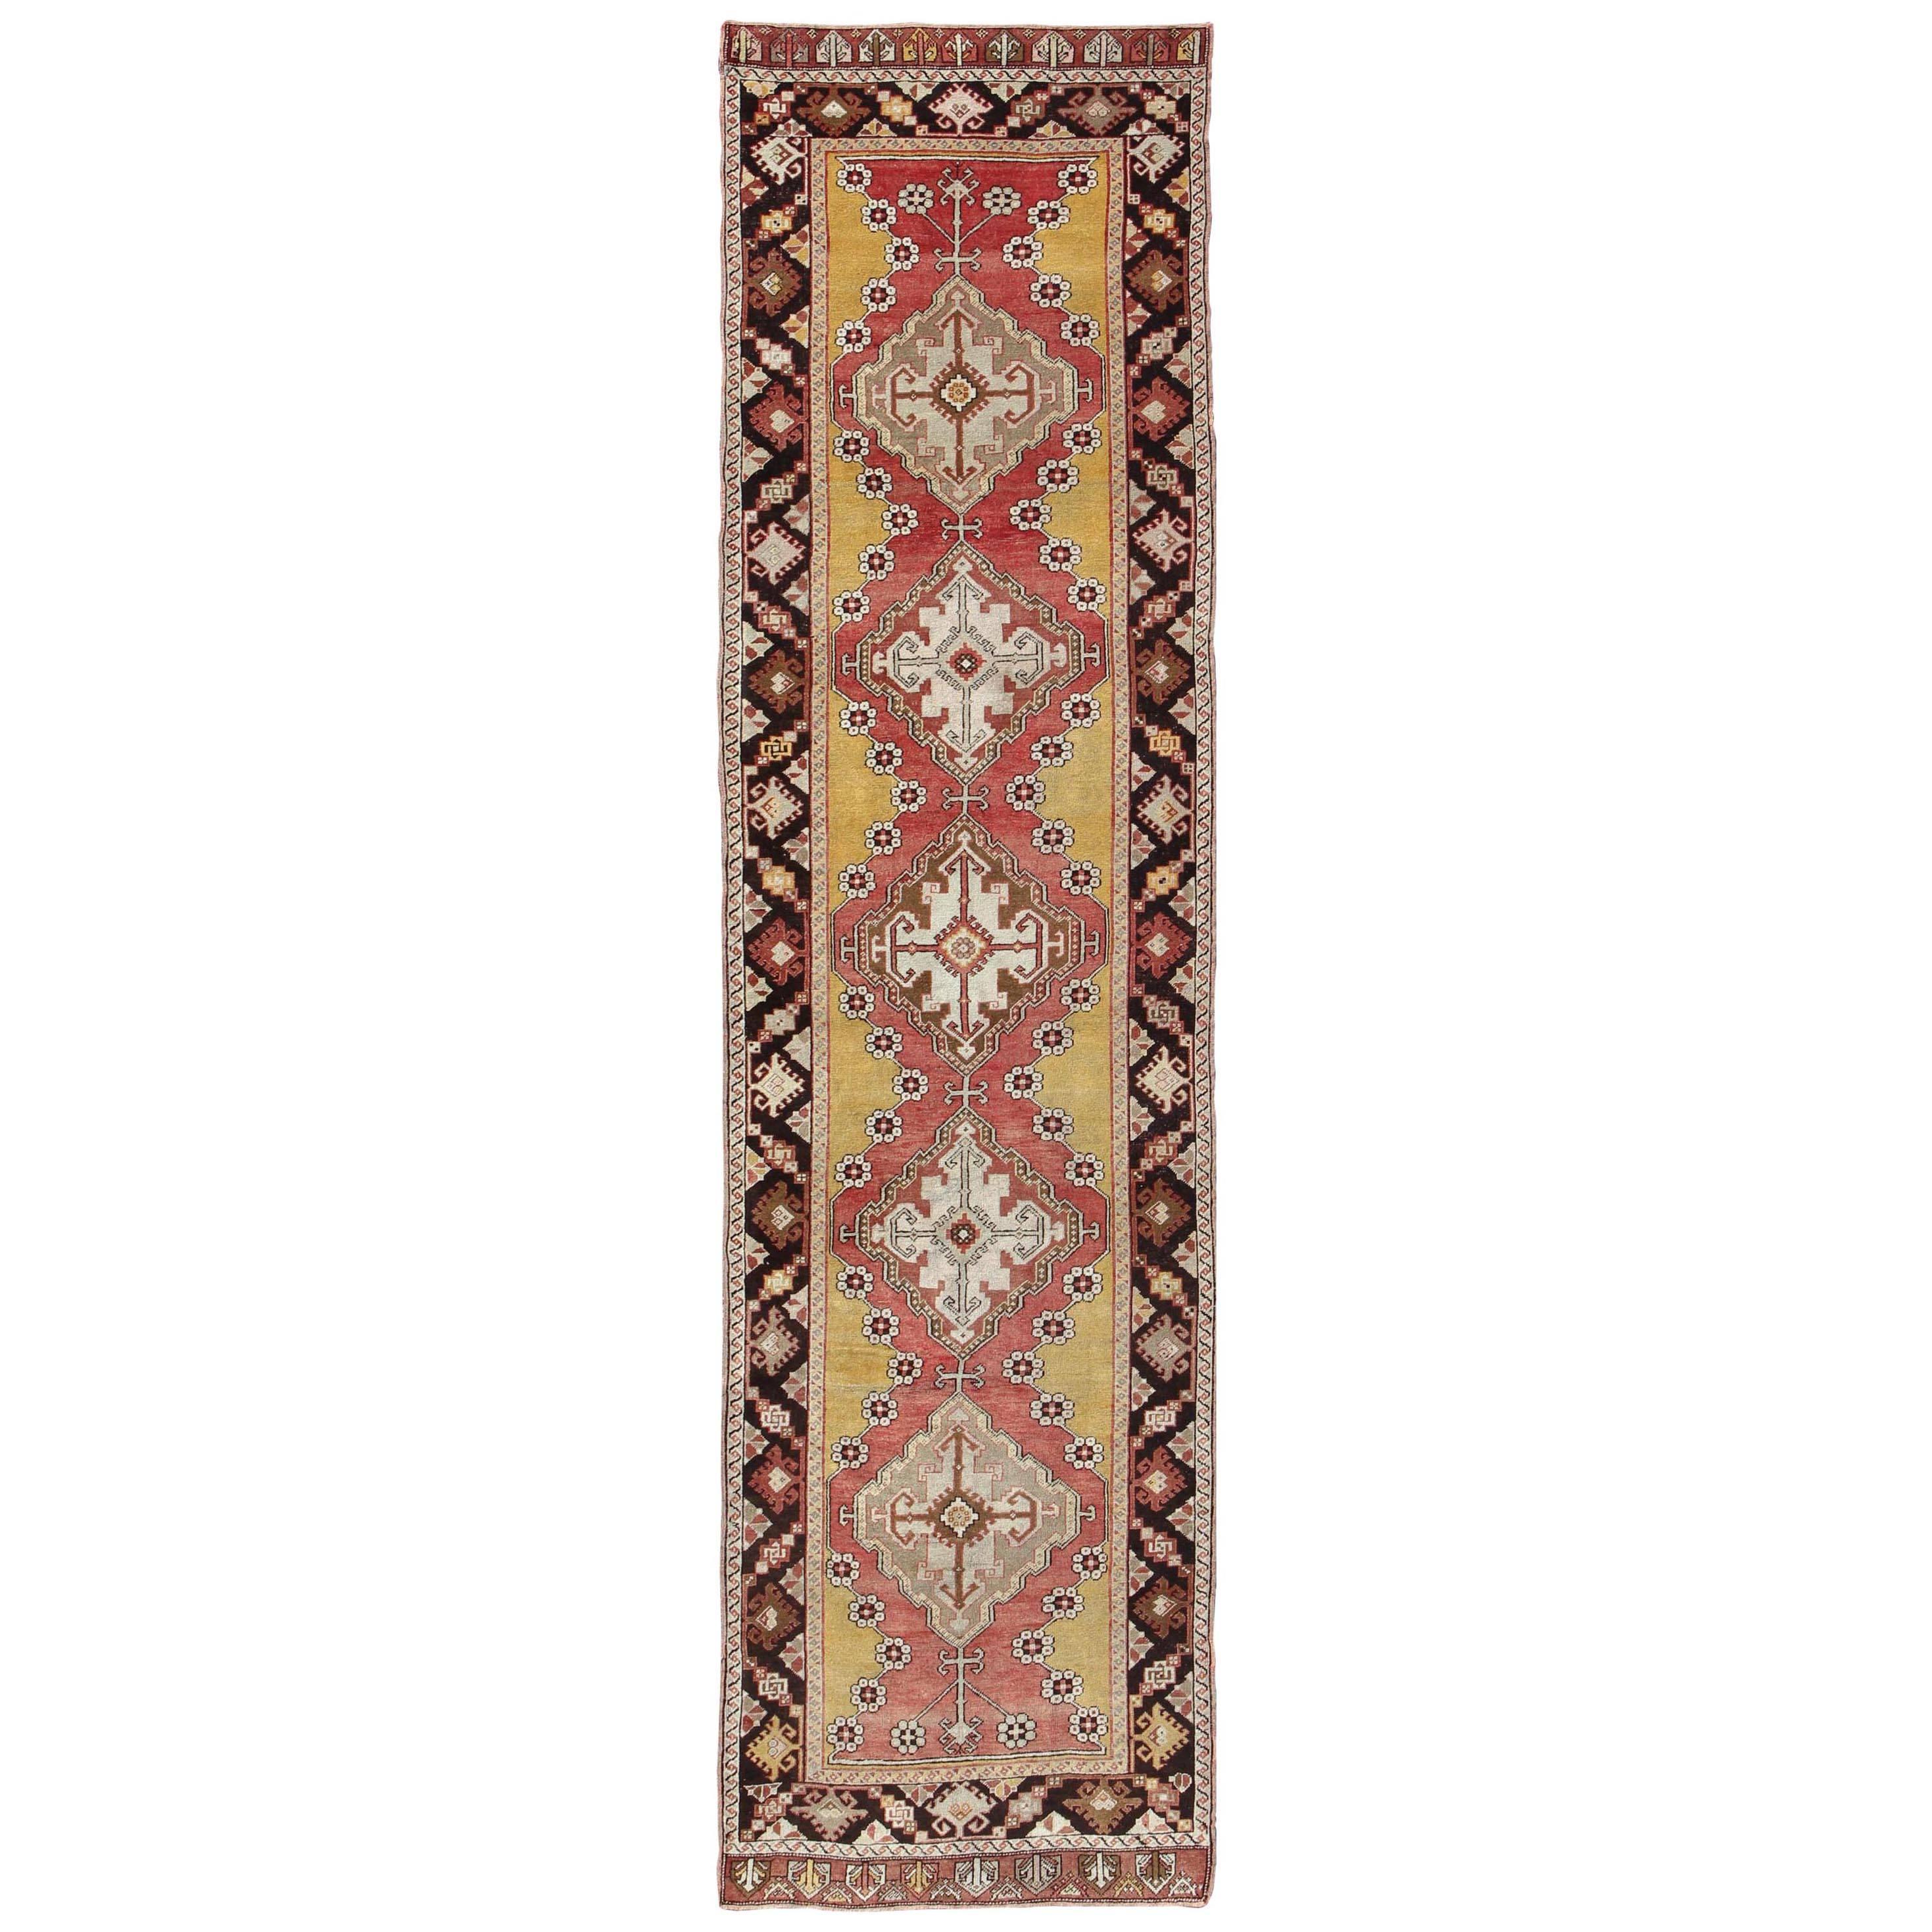 Antique Turkish Oushak Long Runner with Medallions in Brown and Goldish Yellow 